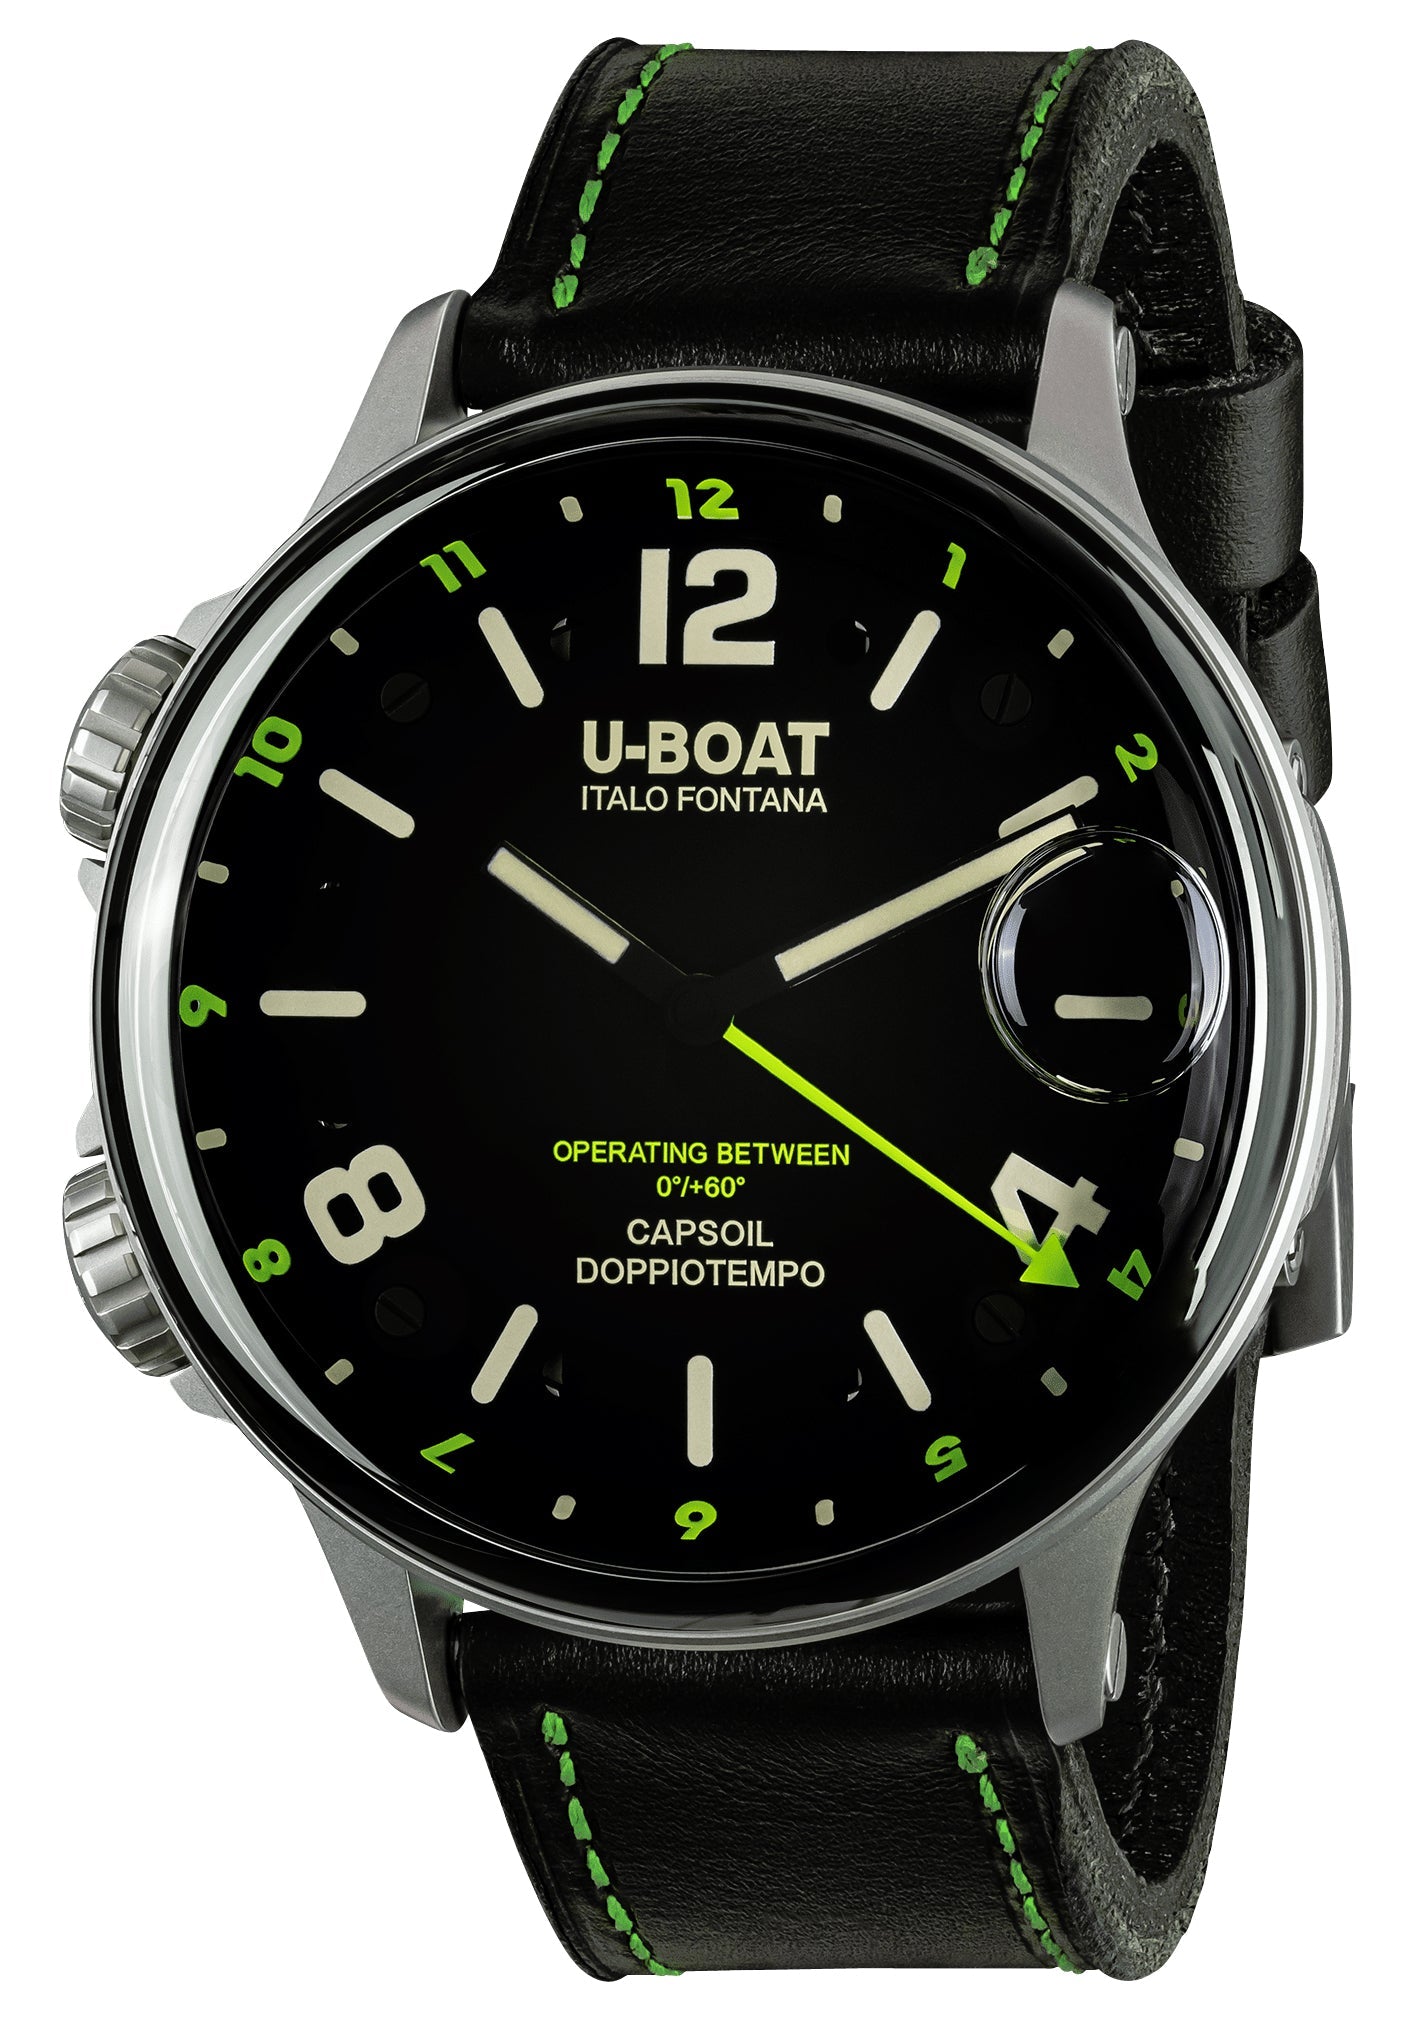 update alt-text with template Watches - Mens-U-Boat-9676-12-hour display, > 50 mm, bi-directional rotating bezel, black, Capsoil Doppiotempo, dual time zone, interchangeable band, leather, mens, menswatches, new arrivals, round, rpSKU_9671, rpSKU_9672, rpSKU_9673, rpSKU_9674, rpSKU_9675, stainless steel case, swiss quartz, U-Boat, watches-Watches & Beyond